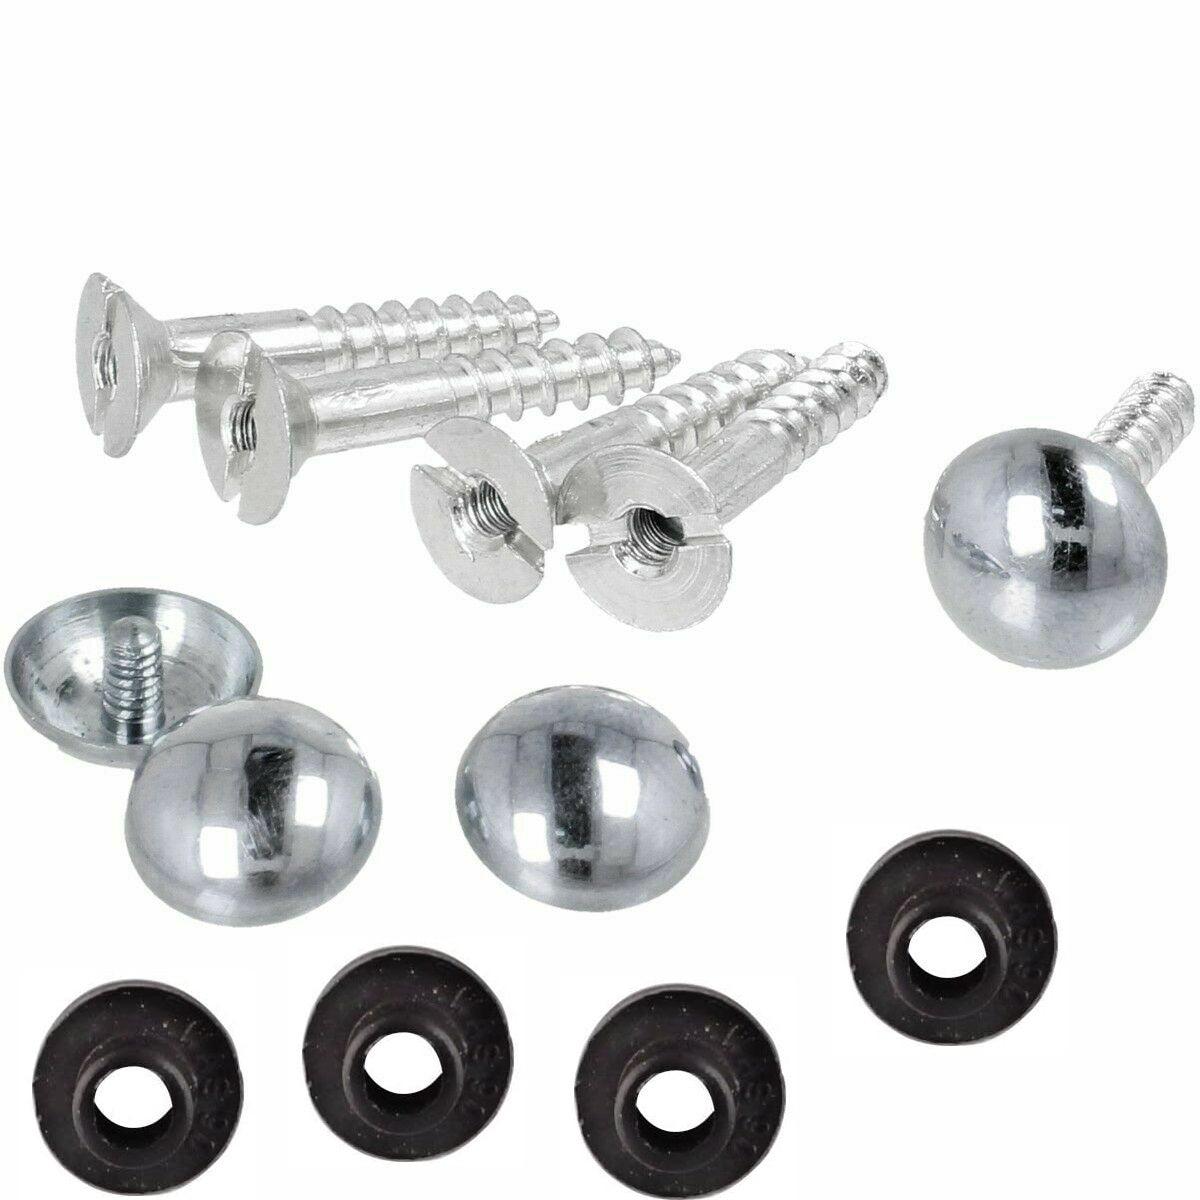 4 x MIRROR SCREWS 25mm/1" POLISHED CHROME Dome Cap Head Cover Wall Bolt Fixing